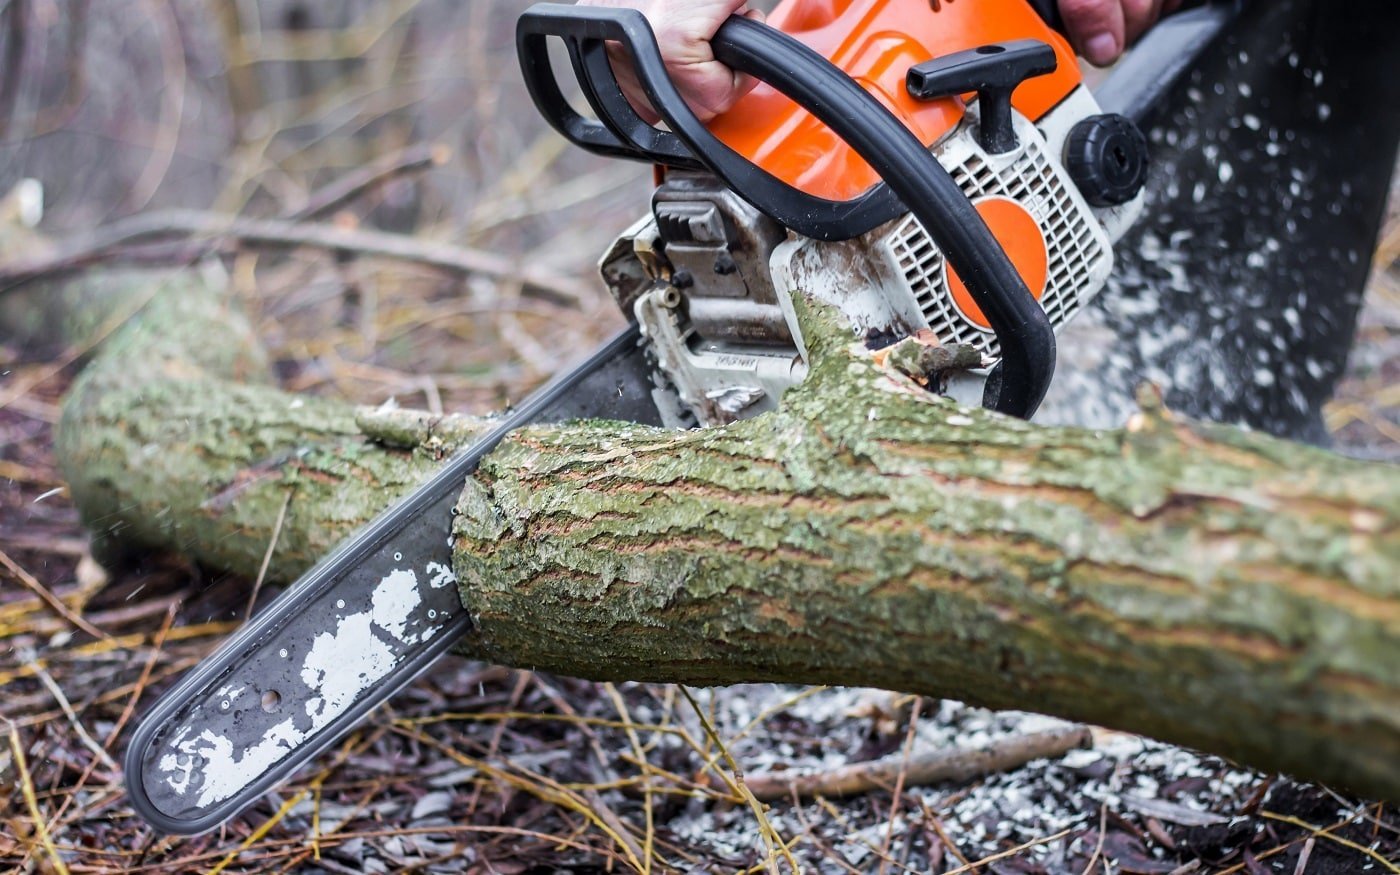 A man using a chainsaw saws a log in a forest